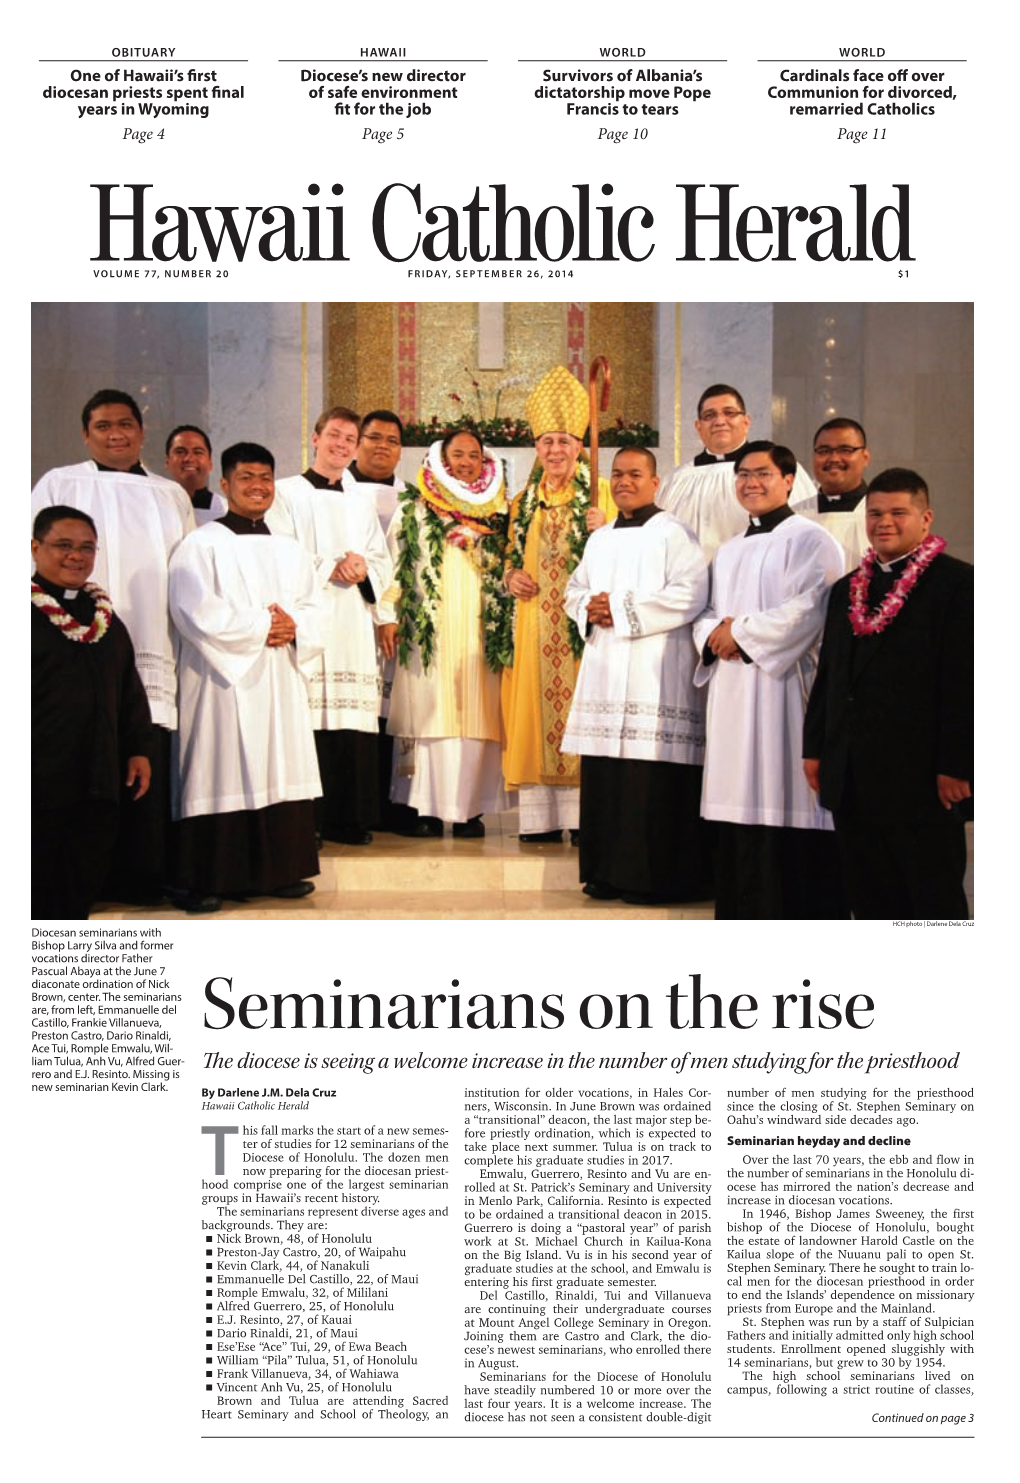 Seminarians on the Rise